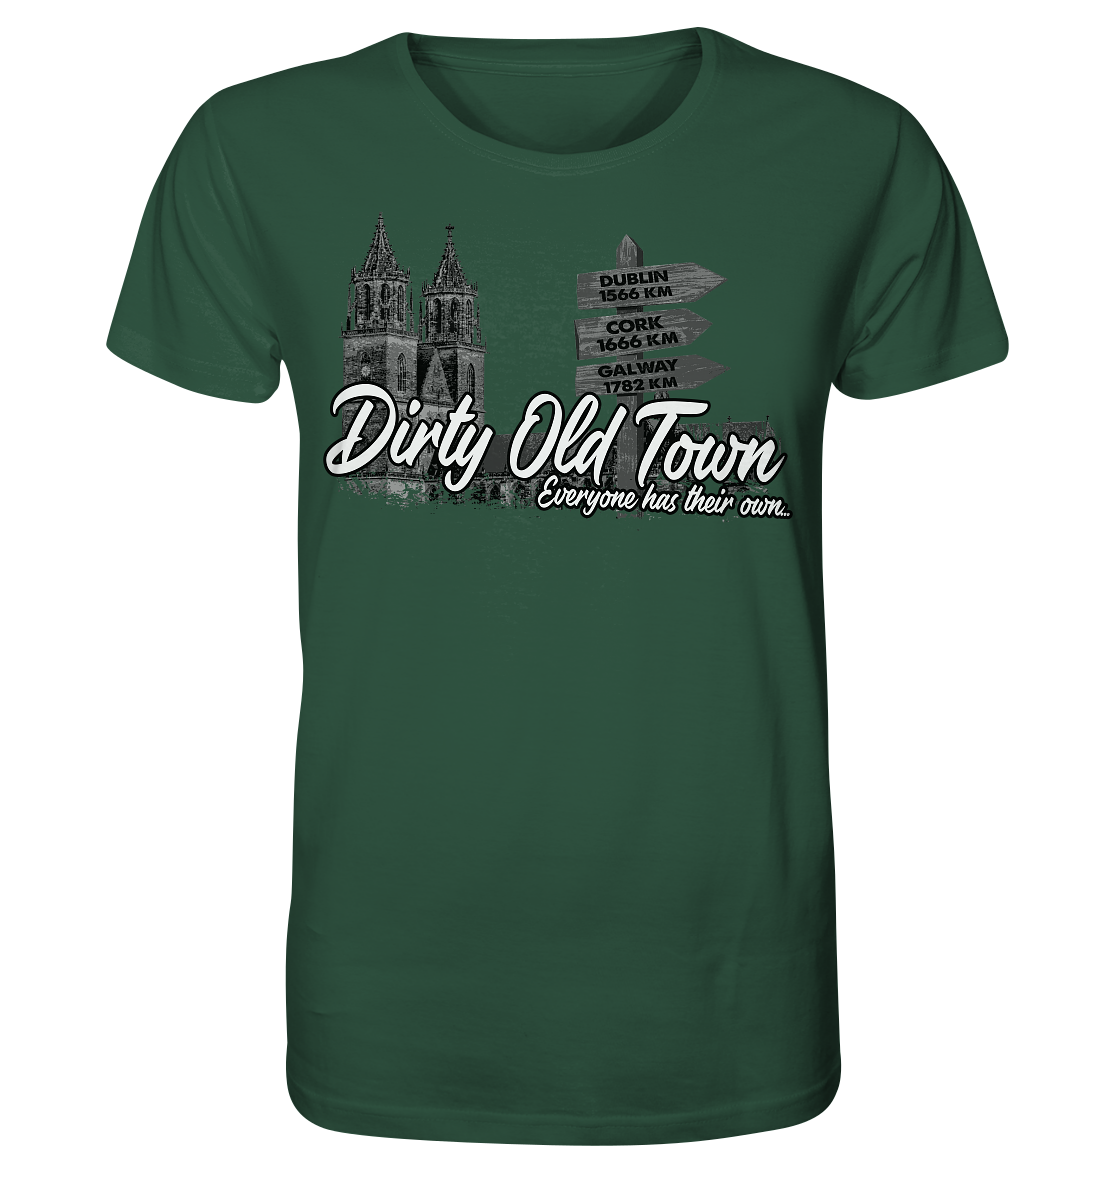 Dirty Old Town "Everyone Has Their Own" (Magdeburg) - Organic Shirt